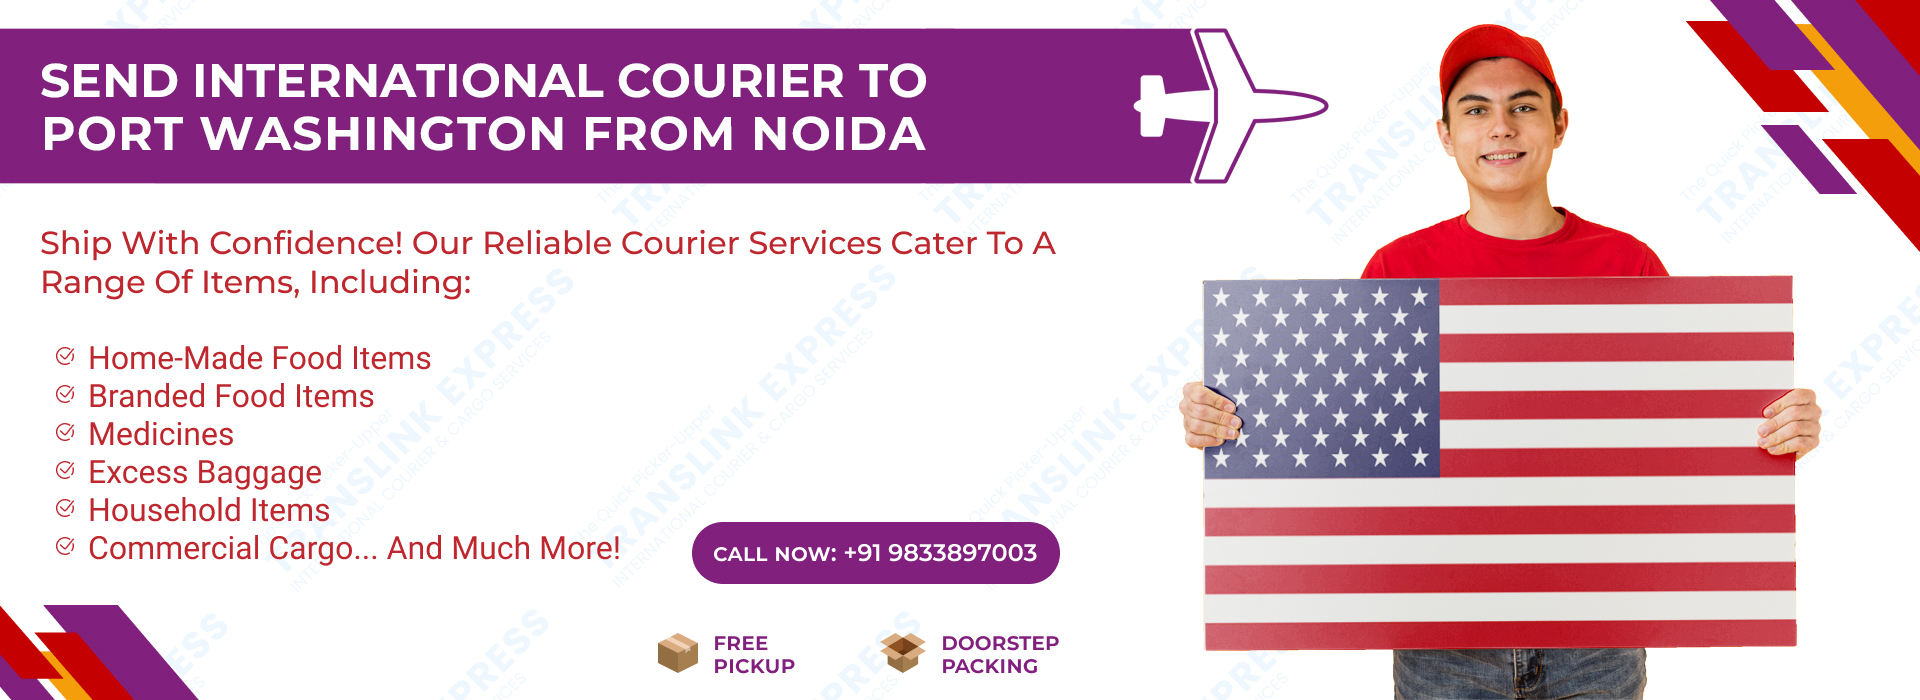 Courier to Port Washington From Noida